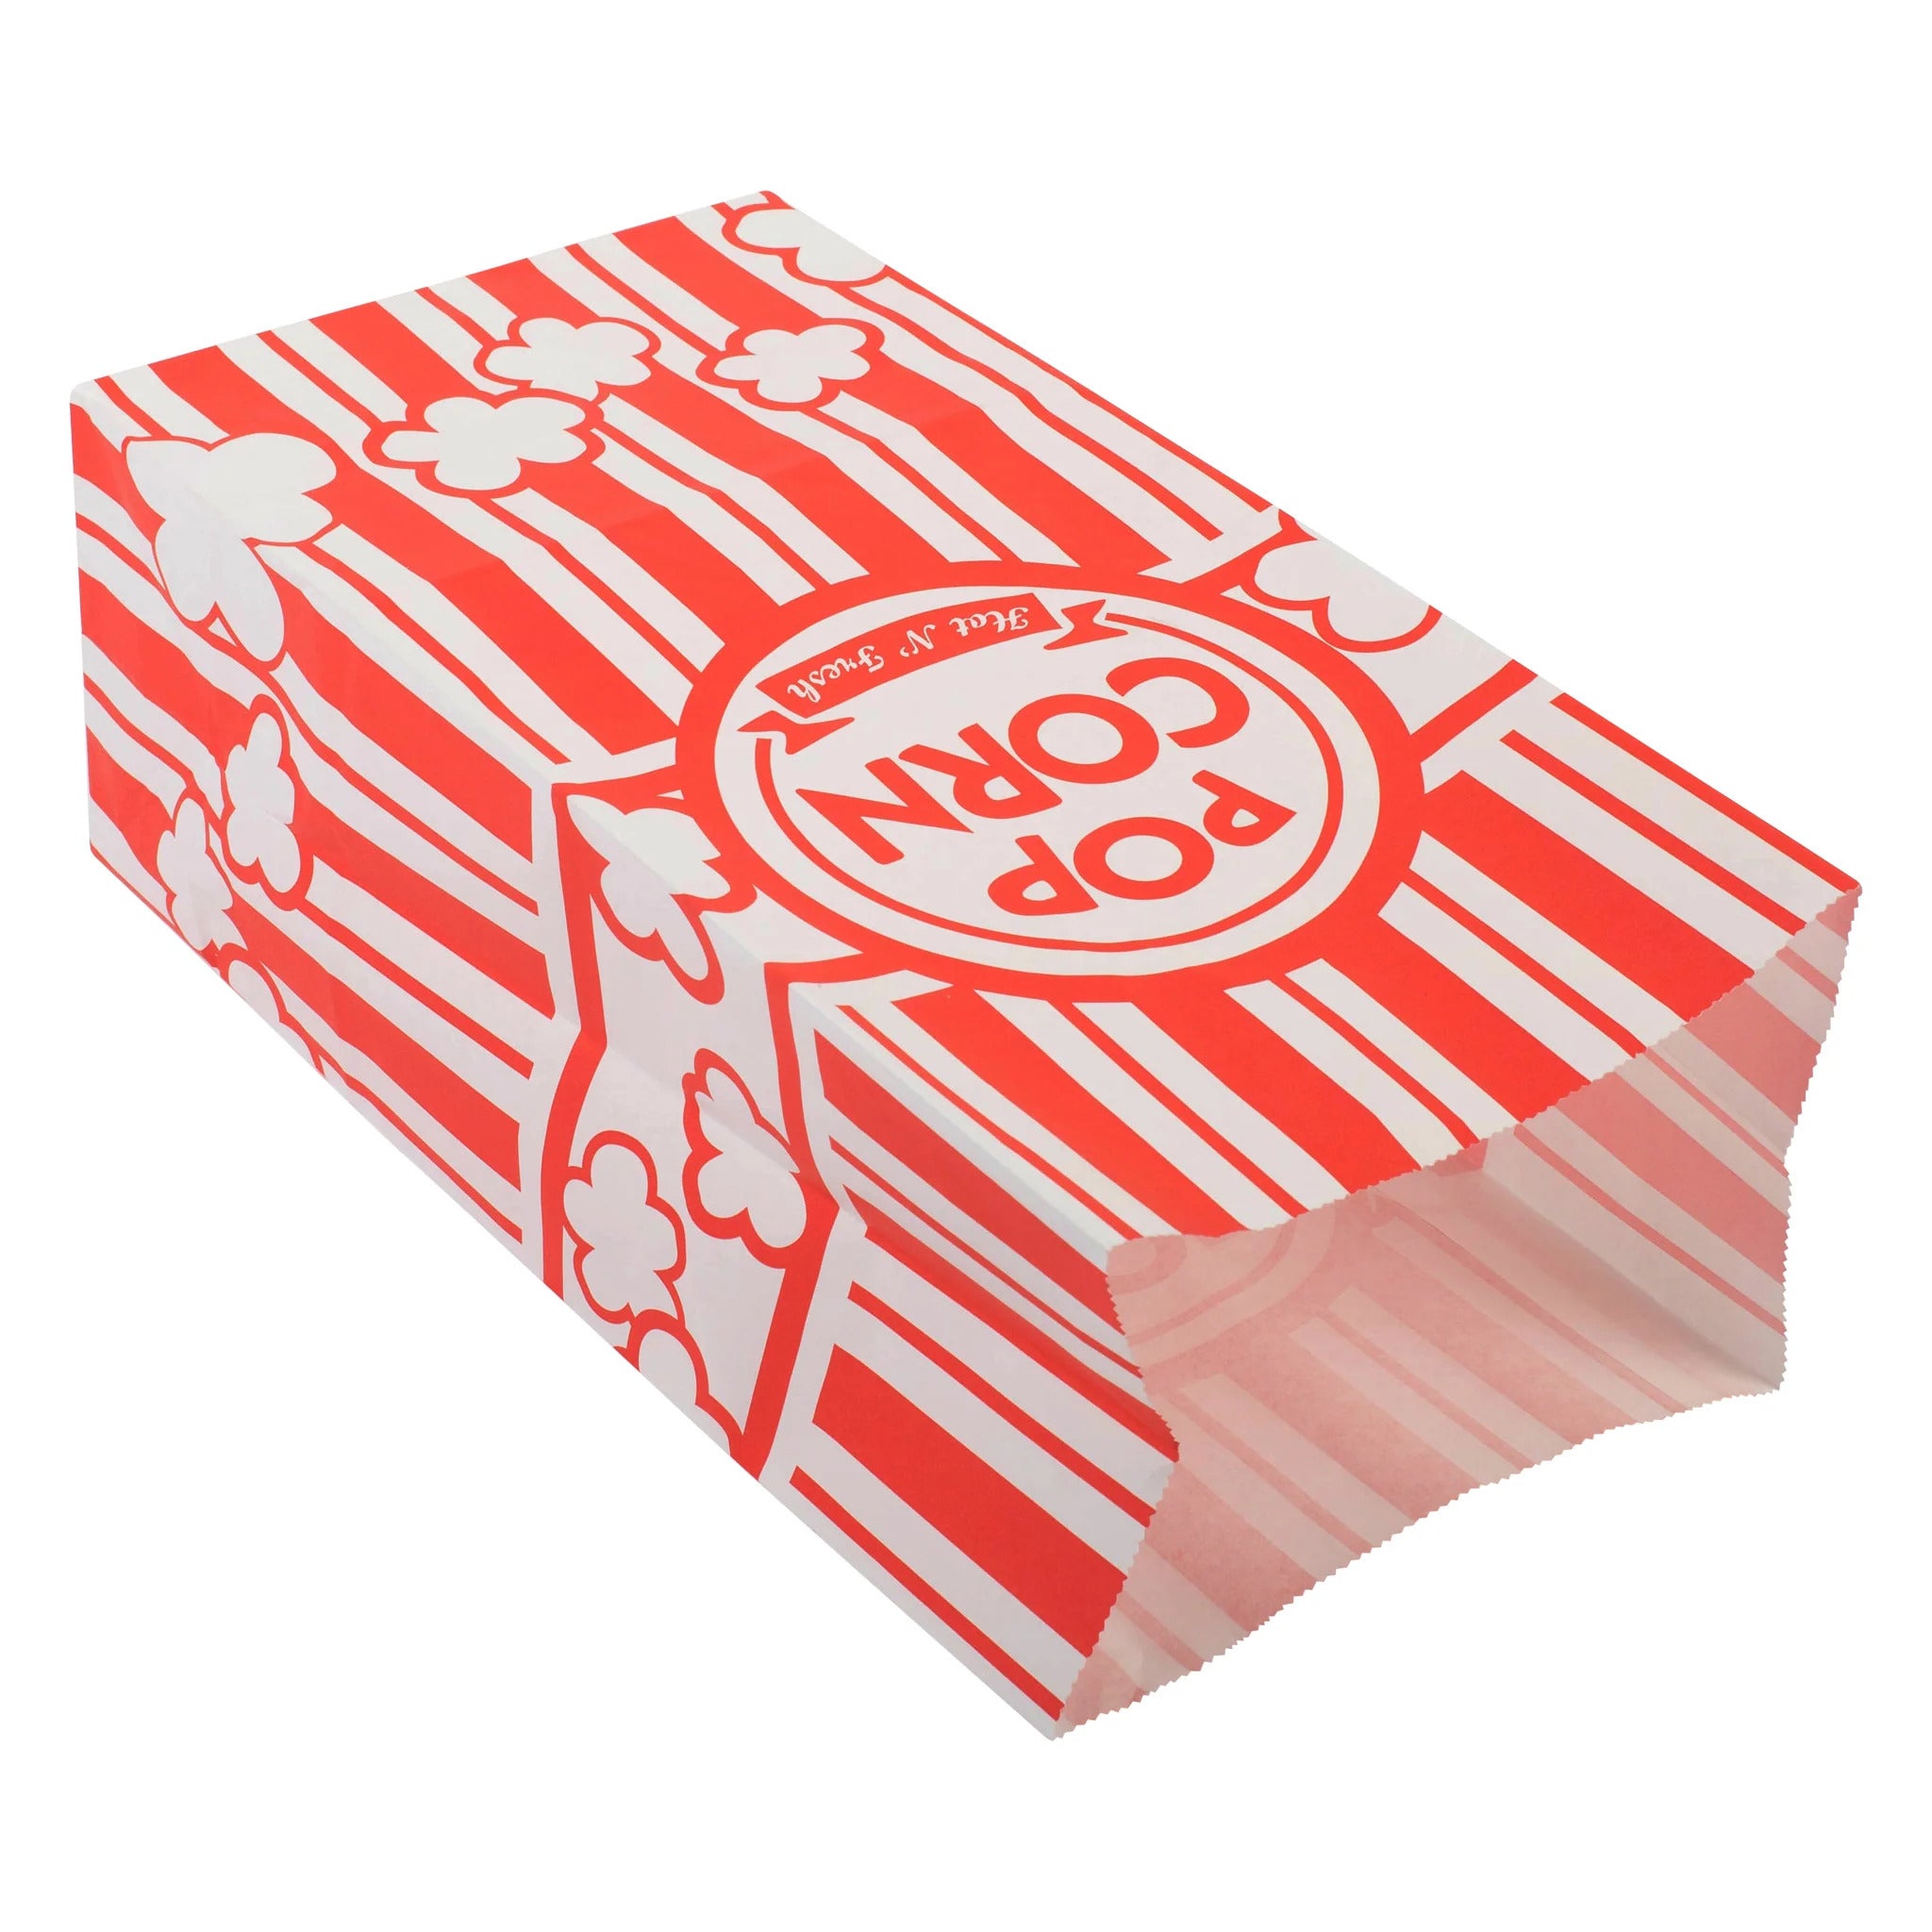 130oz Single Ply Popcorn Bags (Pack of 500)